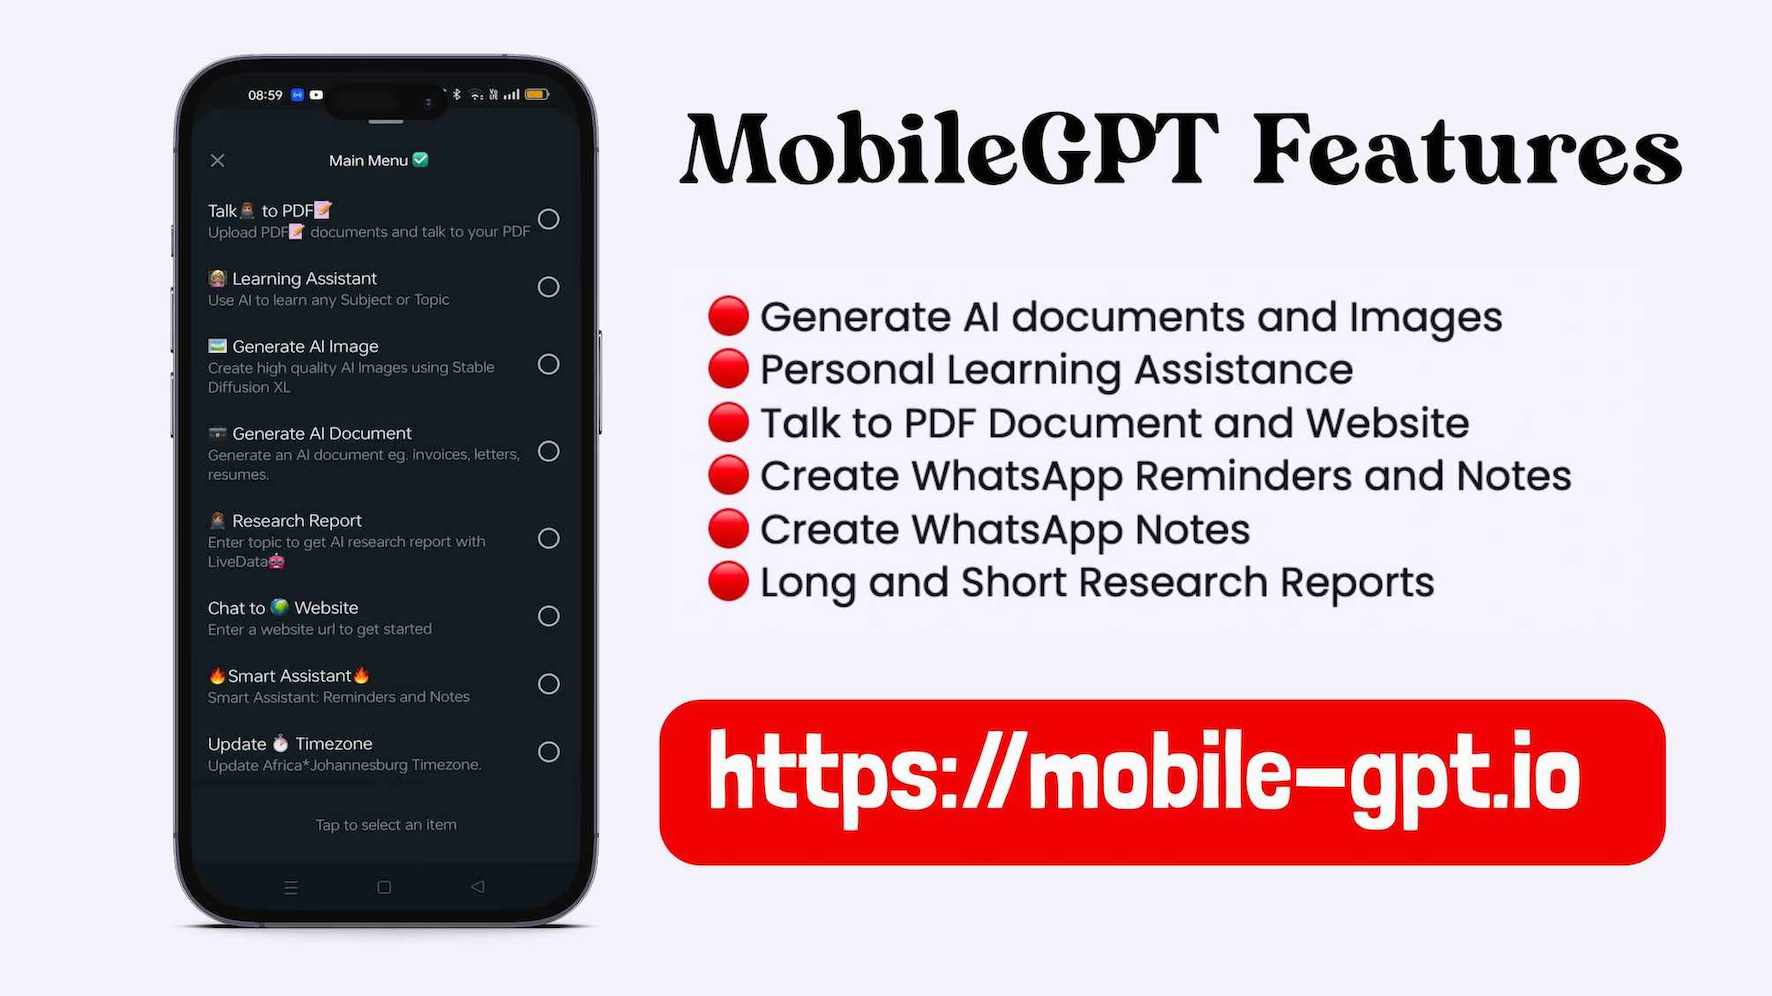 MobileGPT Features